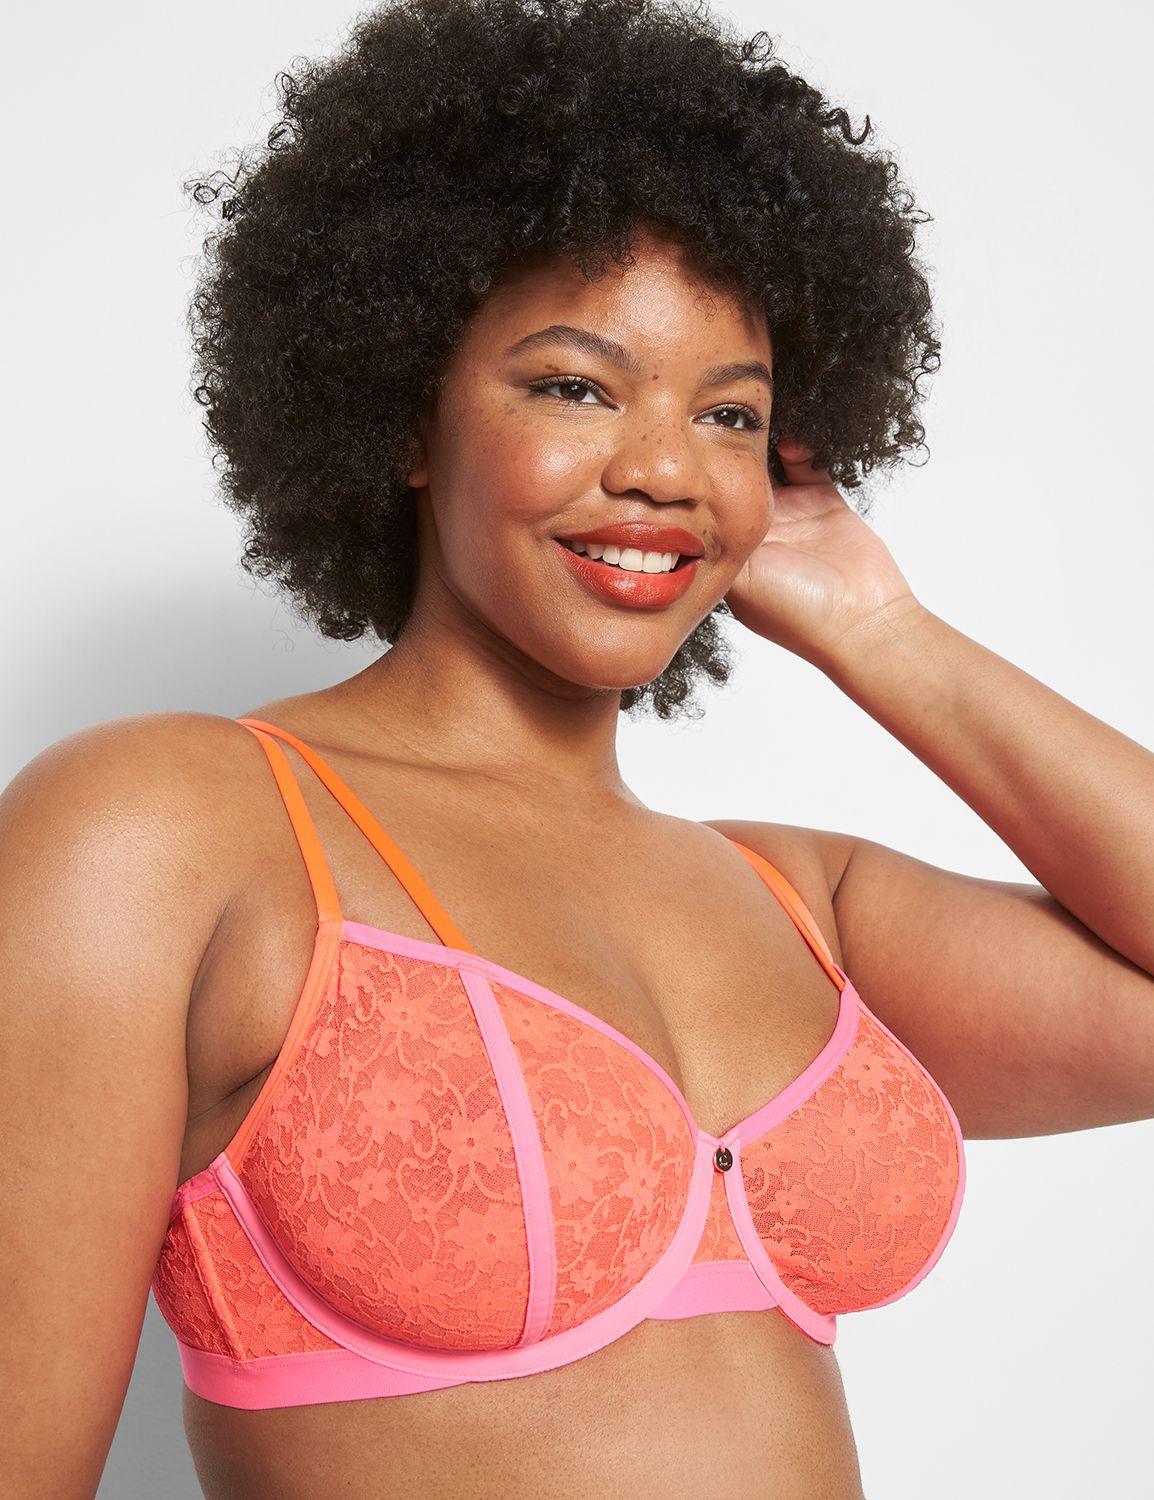 All-Over Lace Unlined Demi Bra